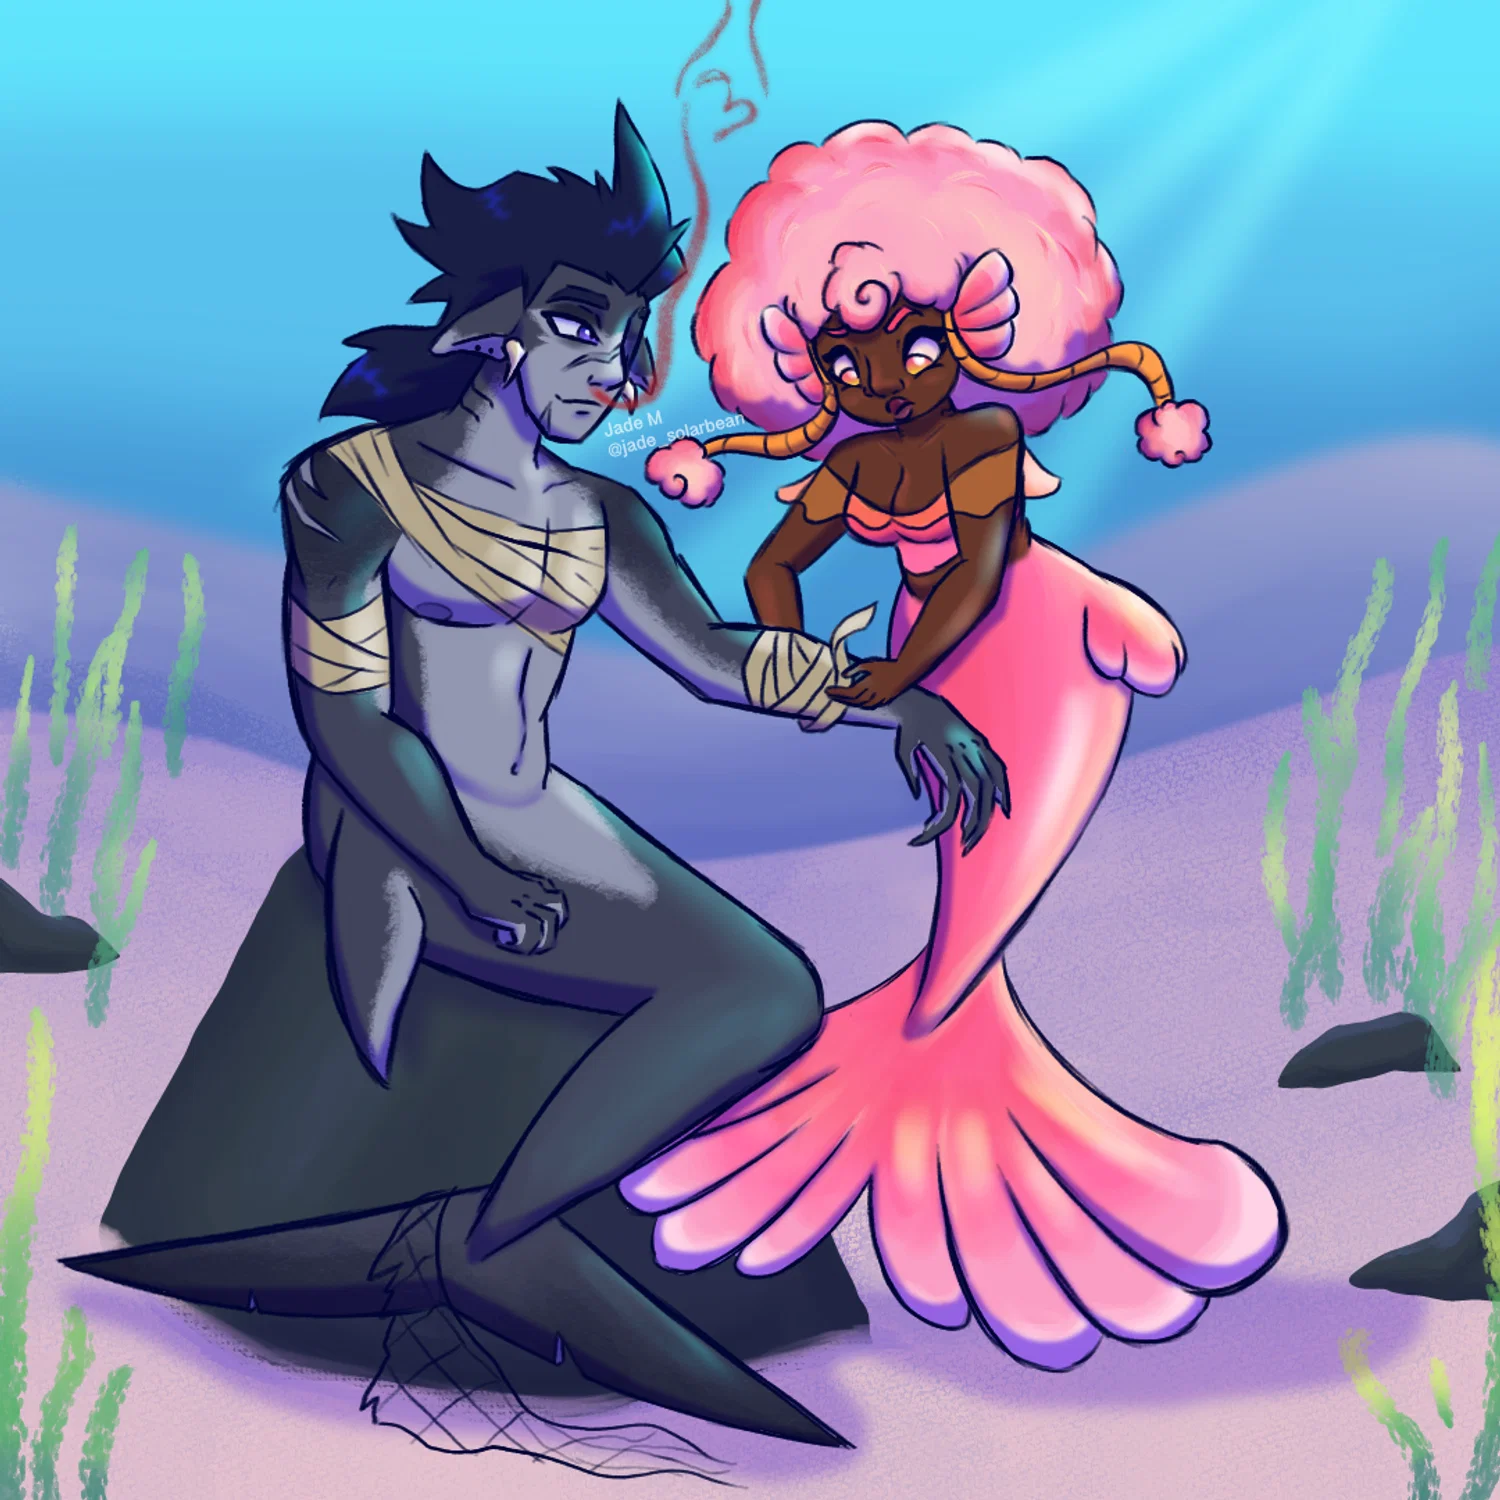 A shark merman sitting on a rock with a pink mermaid bandaging his arm.